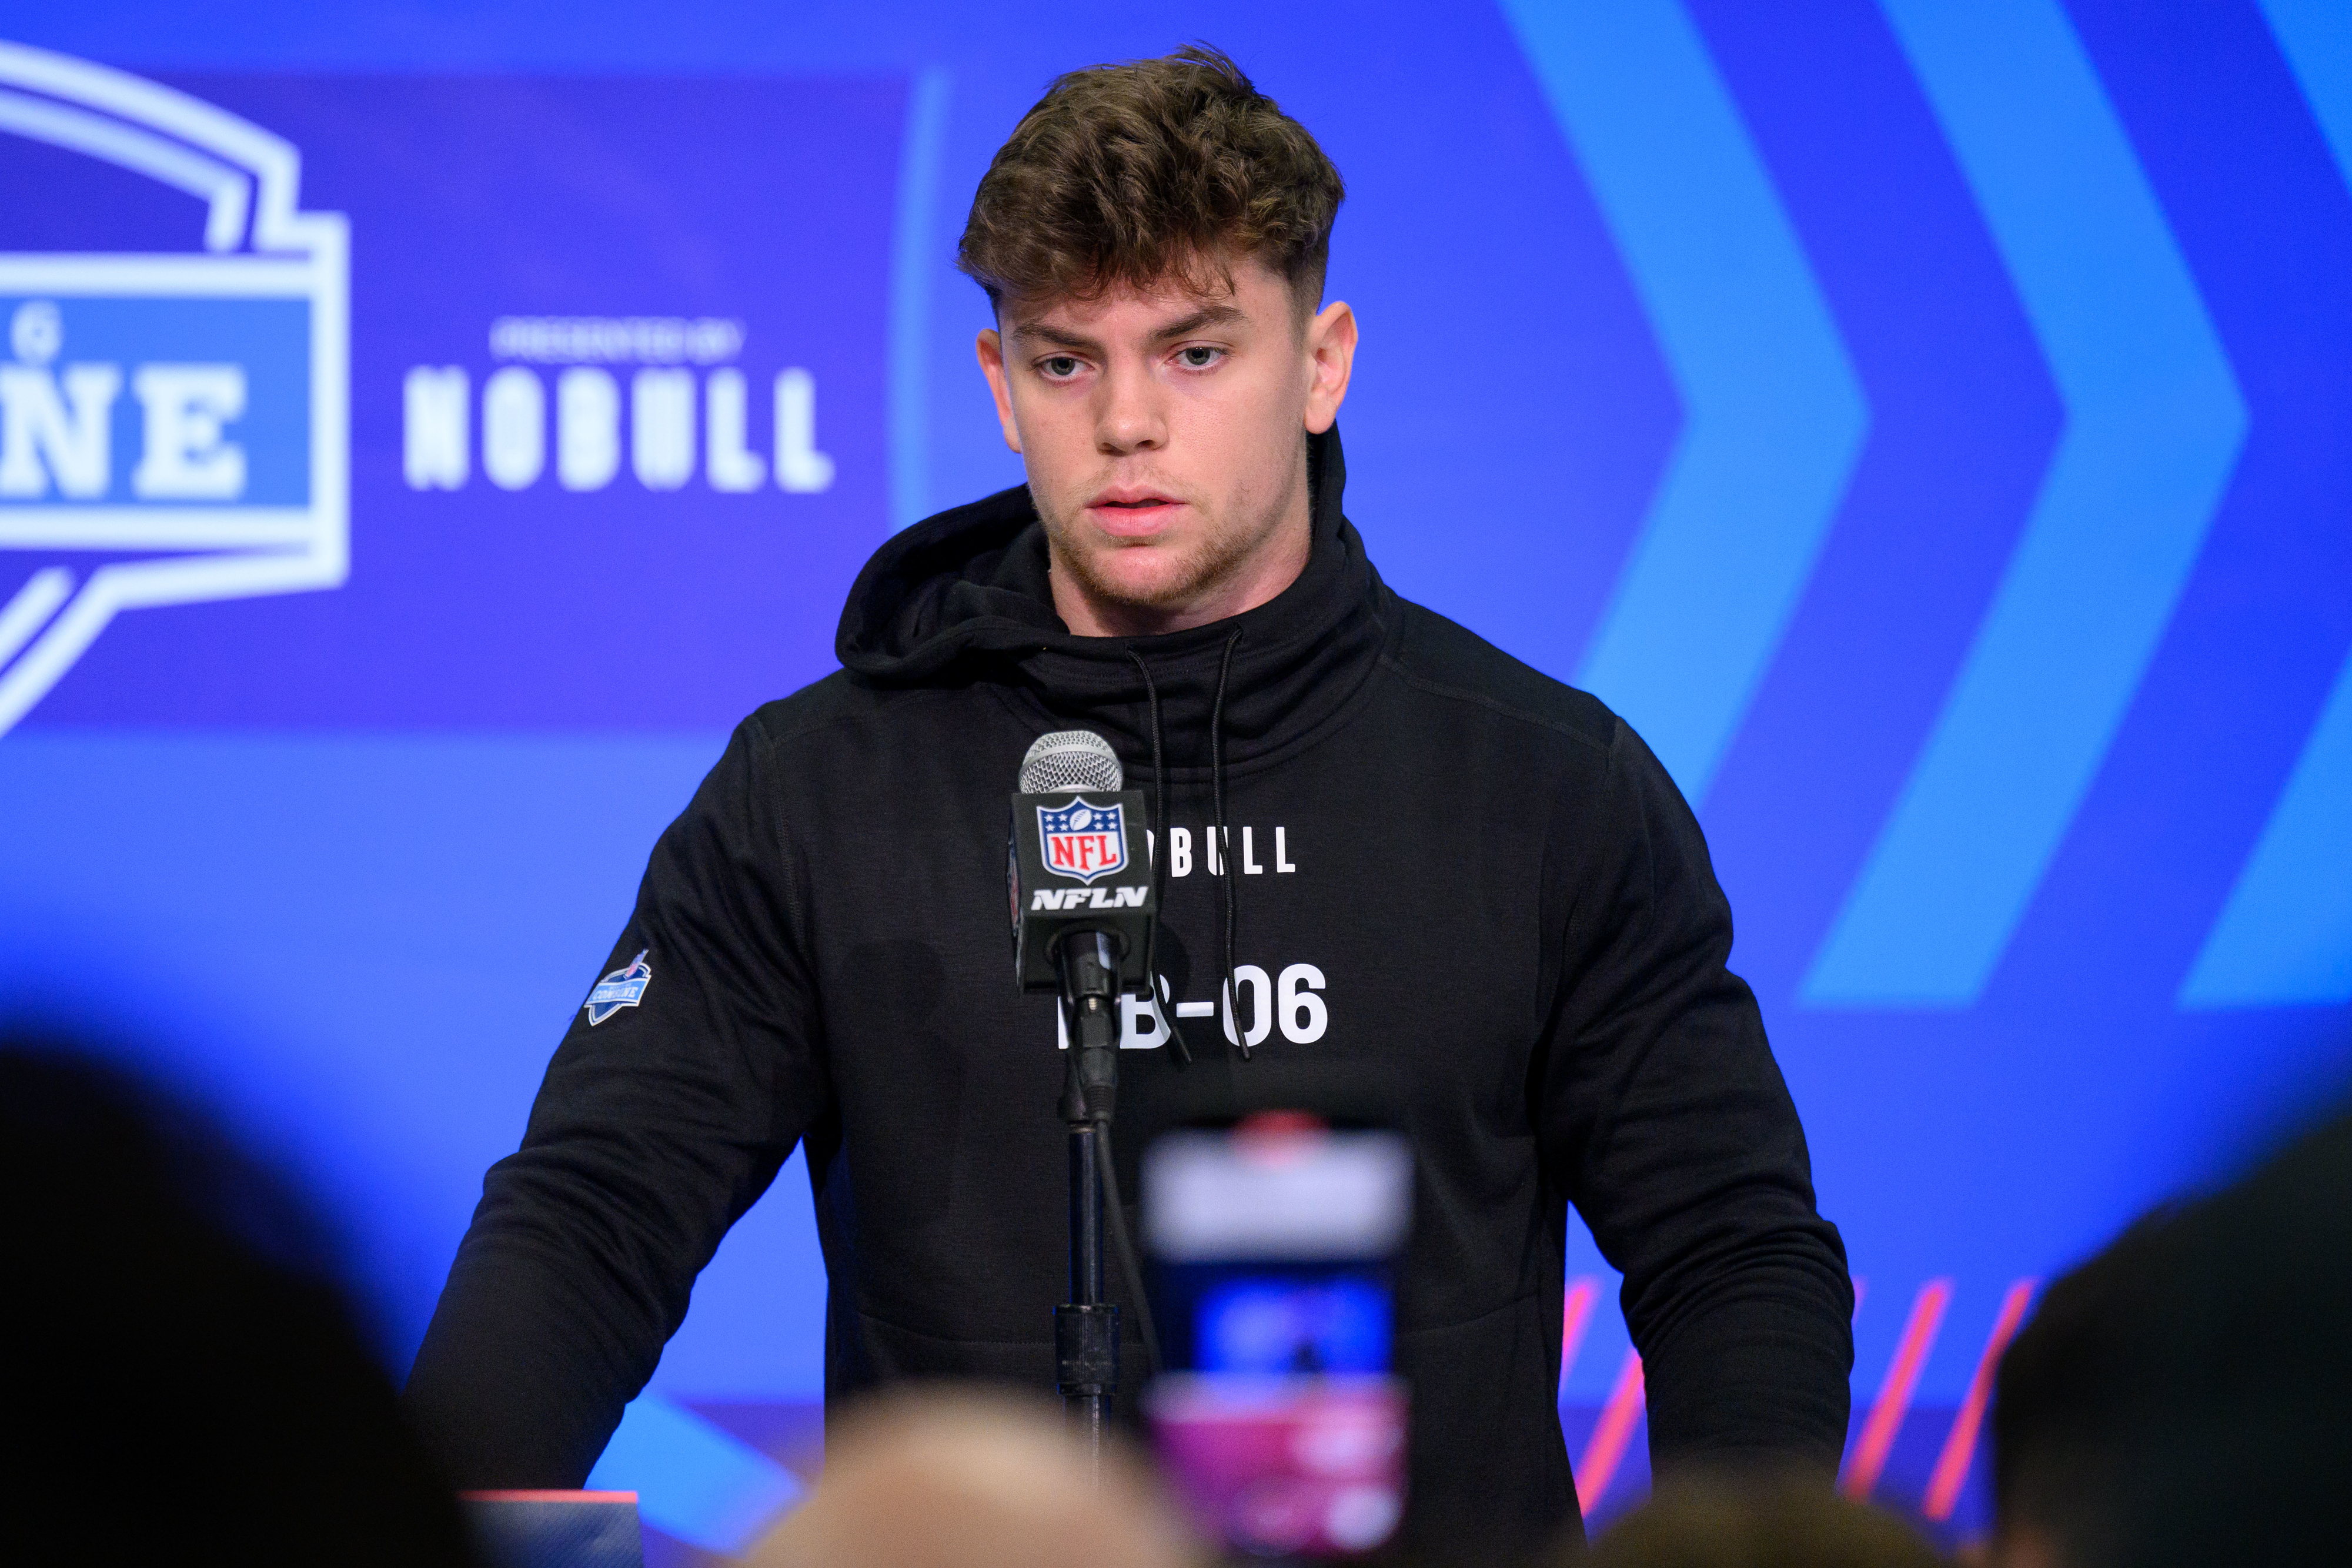 Person speaking at a podium with NFL and sponsor logos, wearing a sports hoodie with the text &quot;LB-06&quot;